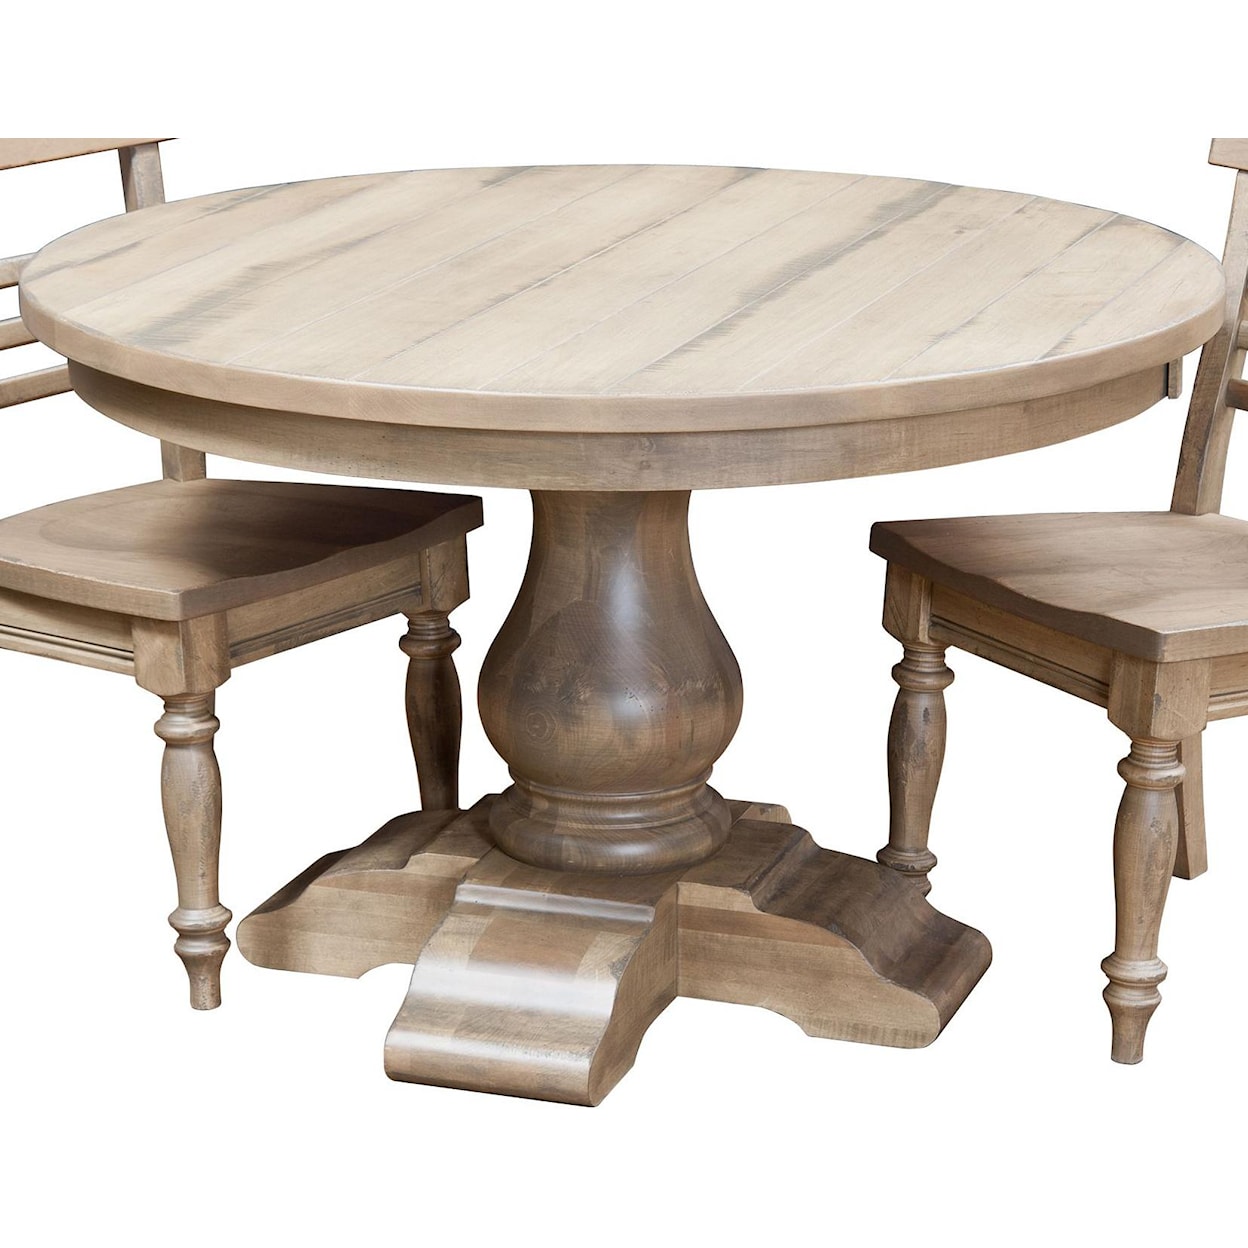 Amish Impressions by Fusion Designs Wellington 54" Round Dining Table